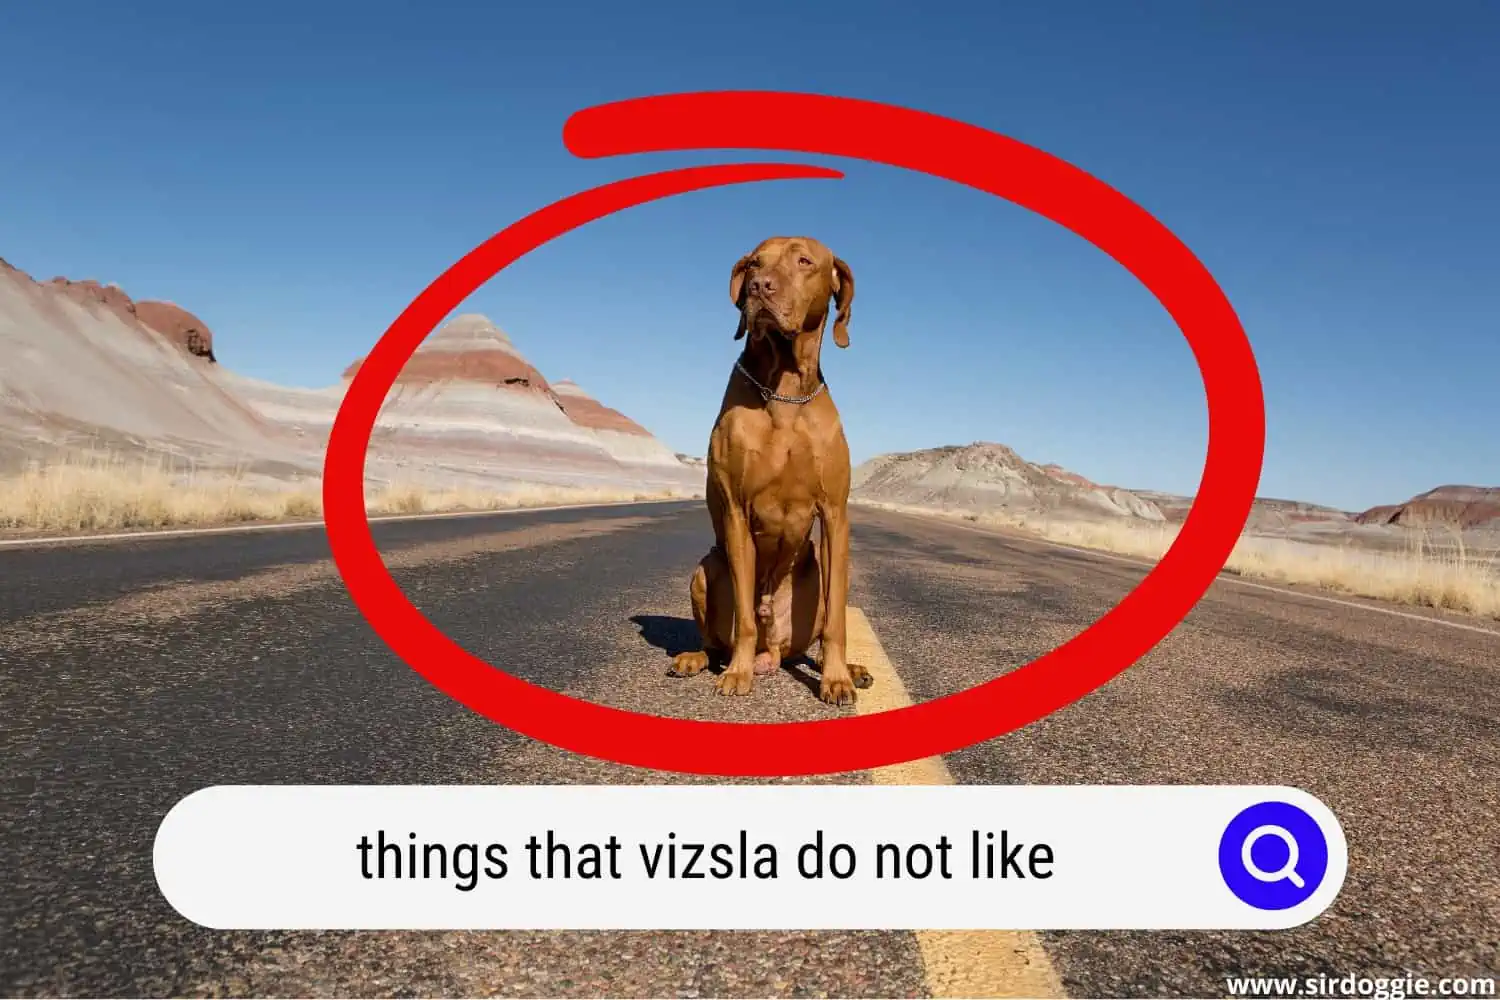 A Vizsla dog being left alone in the road